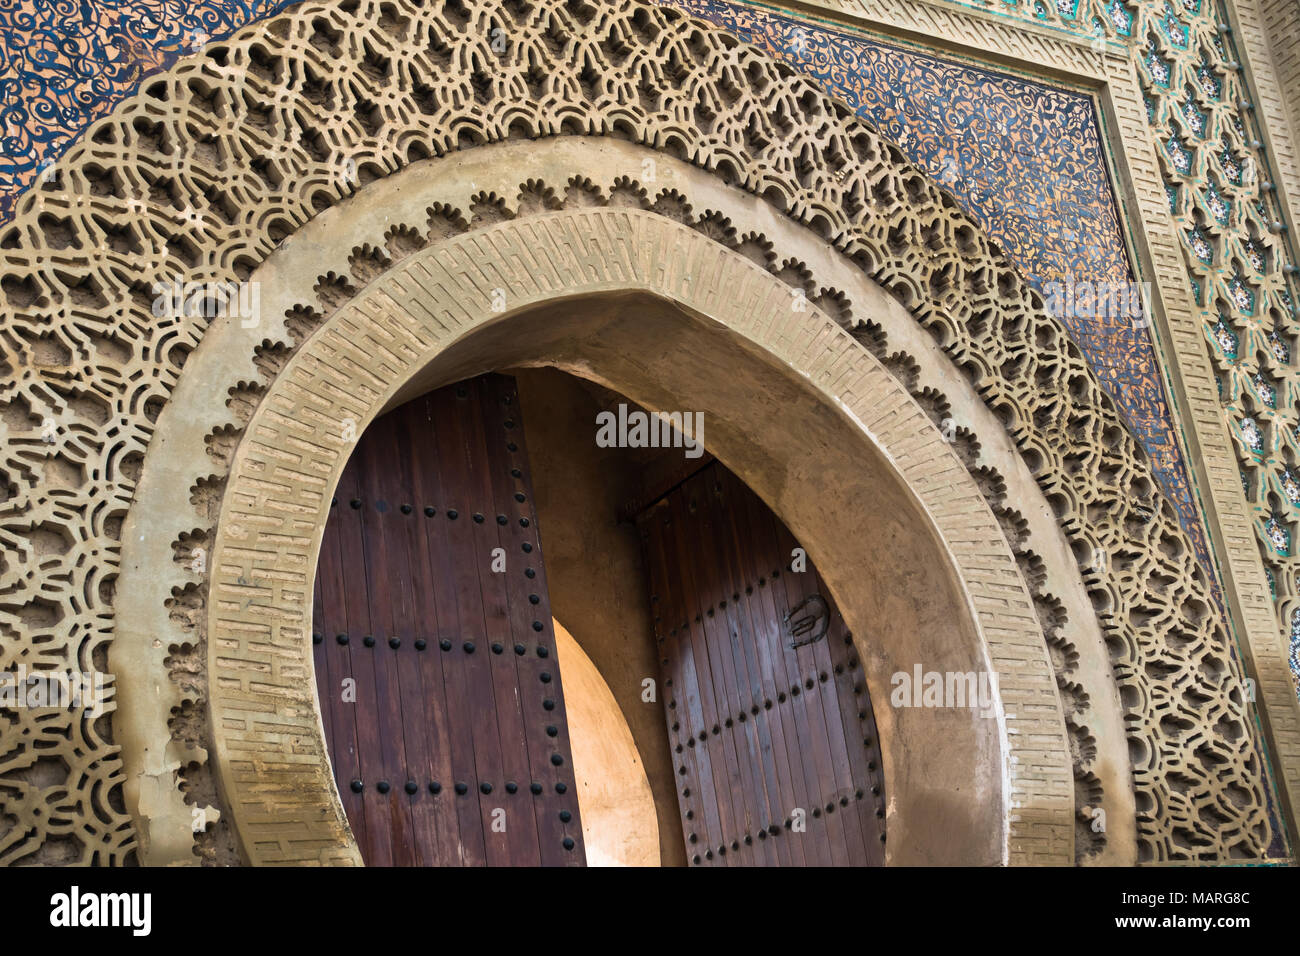 Detail of Bab Mansour Gate at El Hedime square, decorated with mosaic ceramic tiles, in Meknes, Morocco Stock Photo